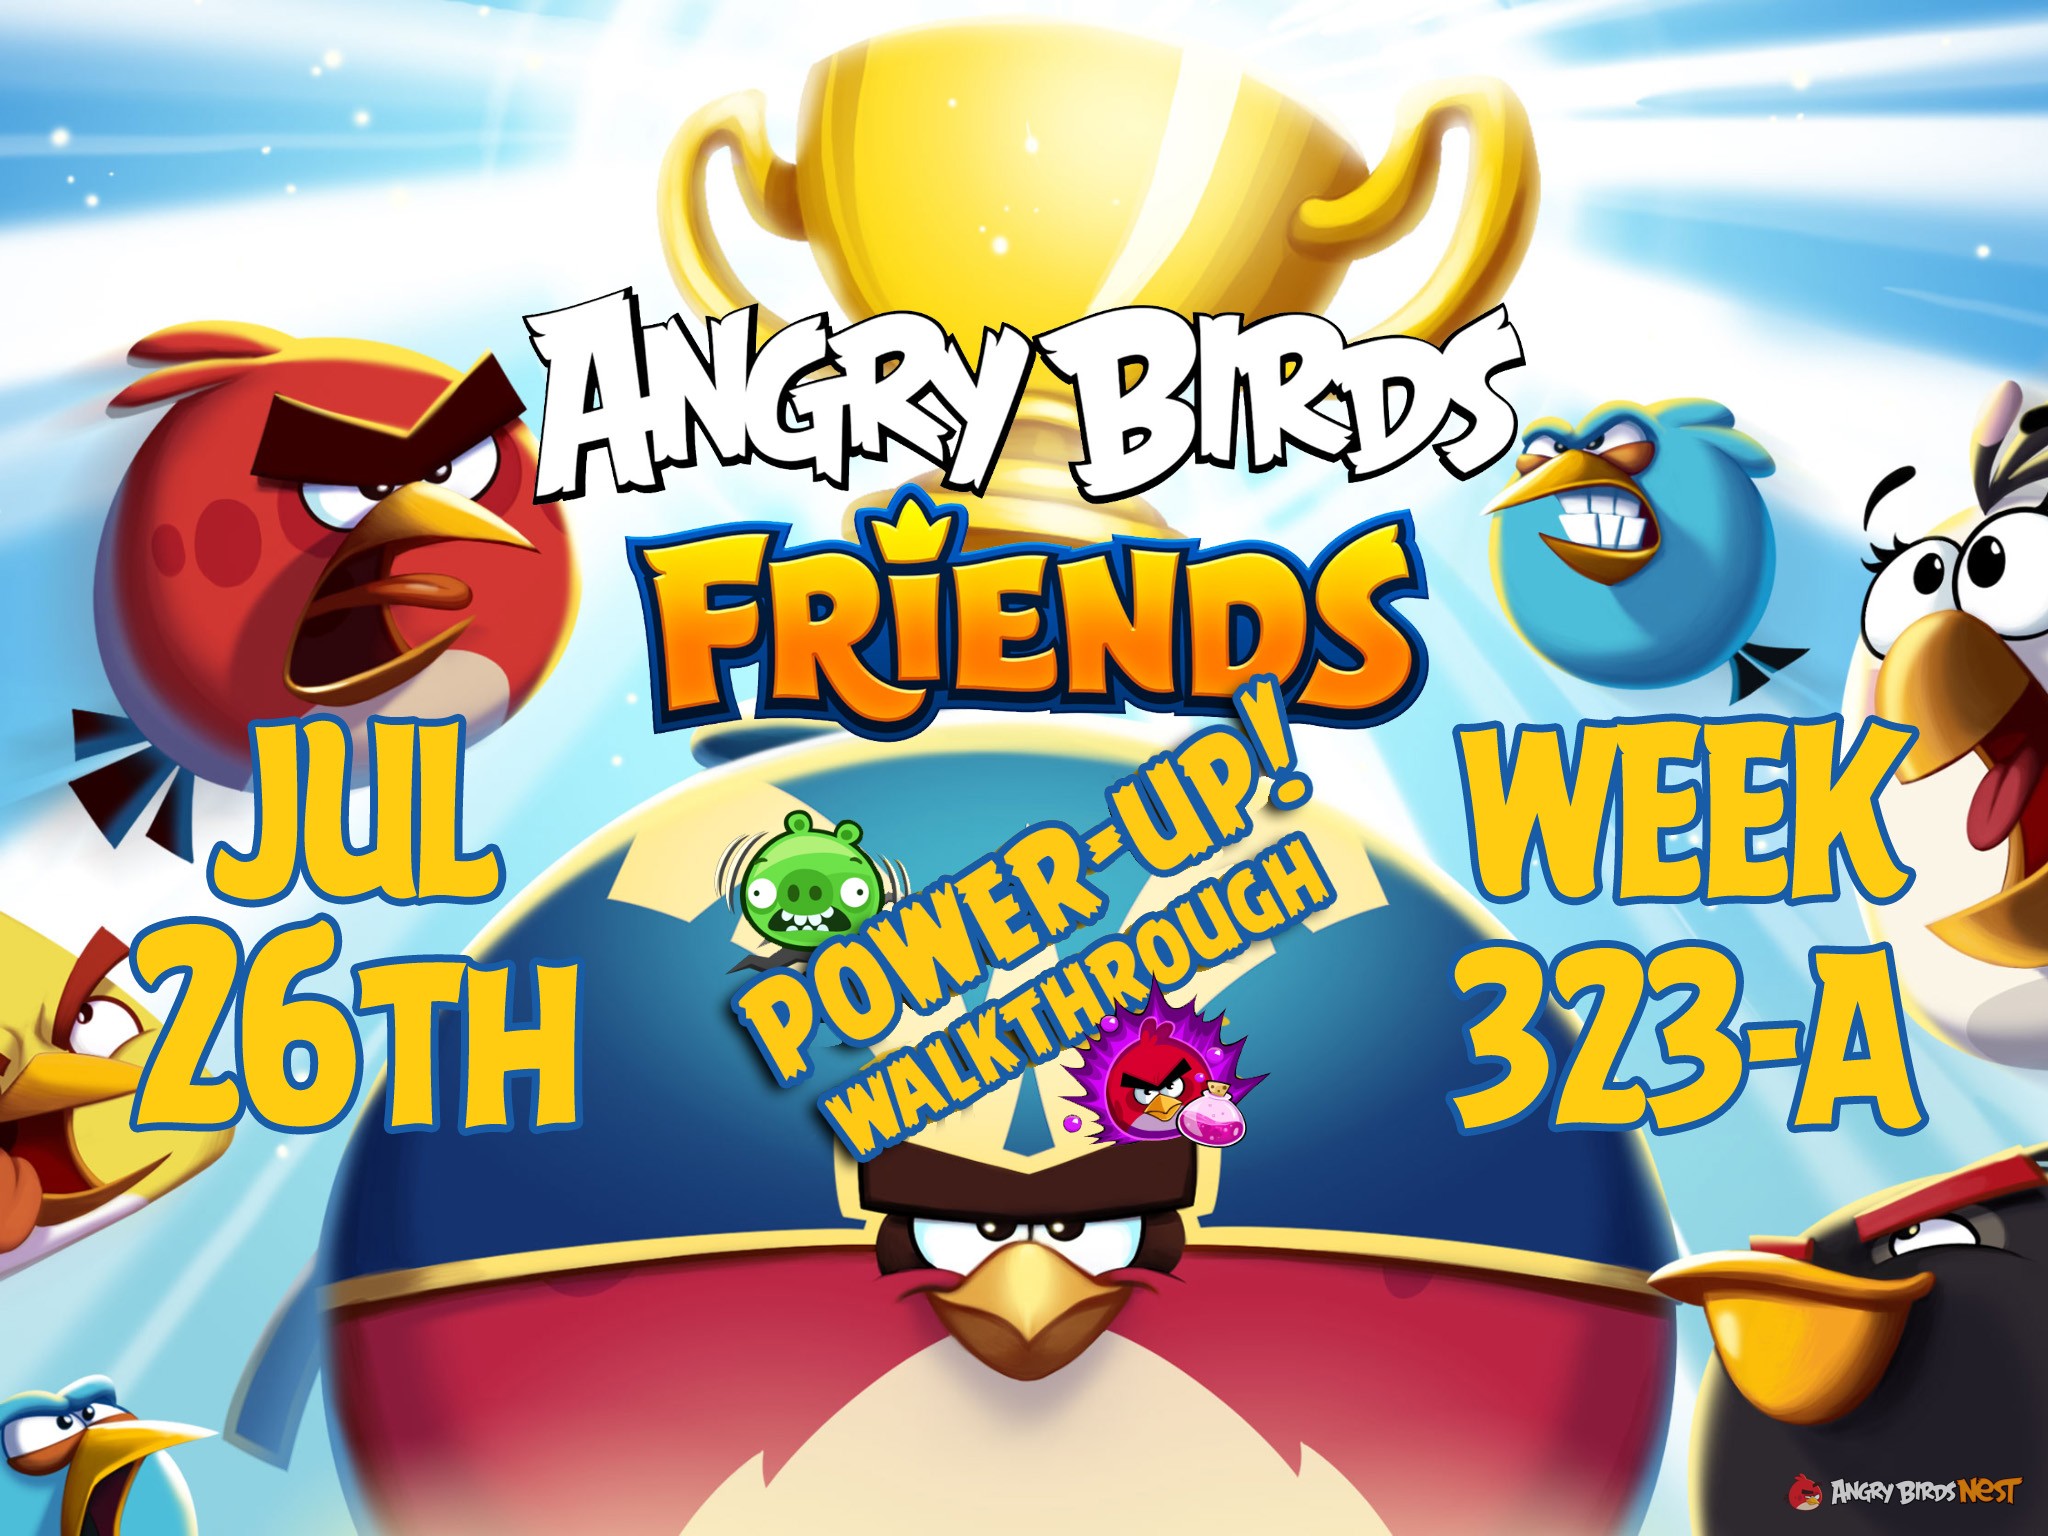 Angry-Birds-Friends-Tournament-Week-323-A-Feature-Image-PU